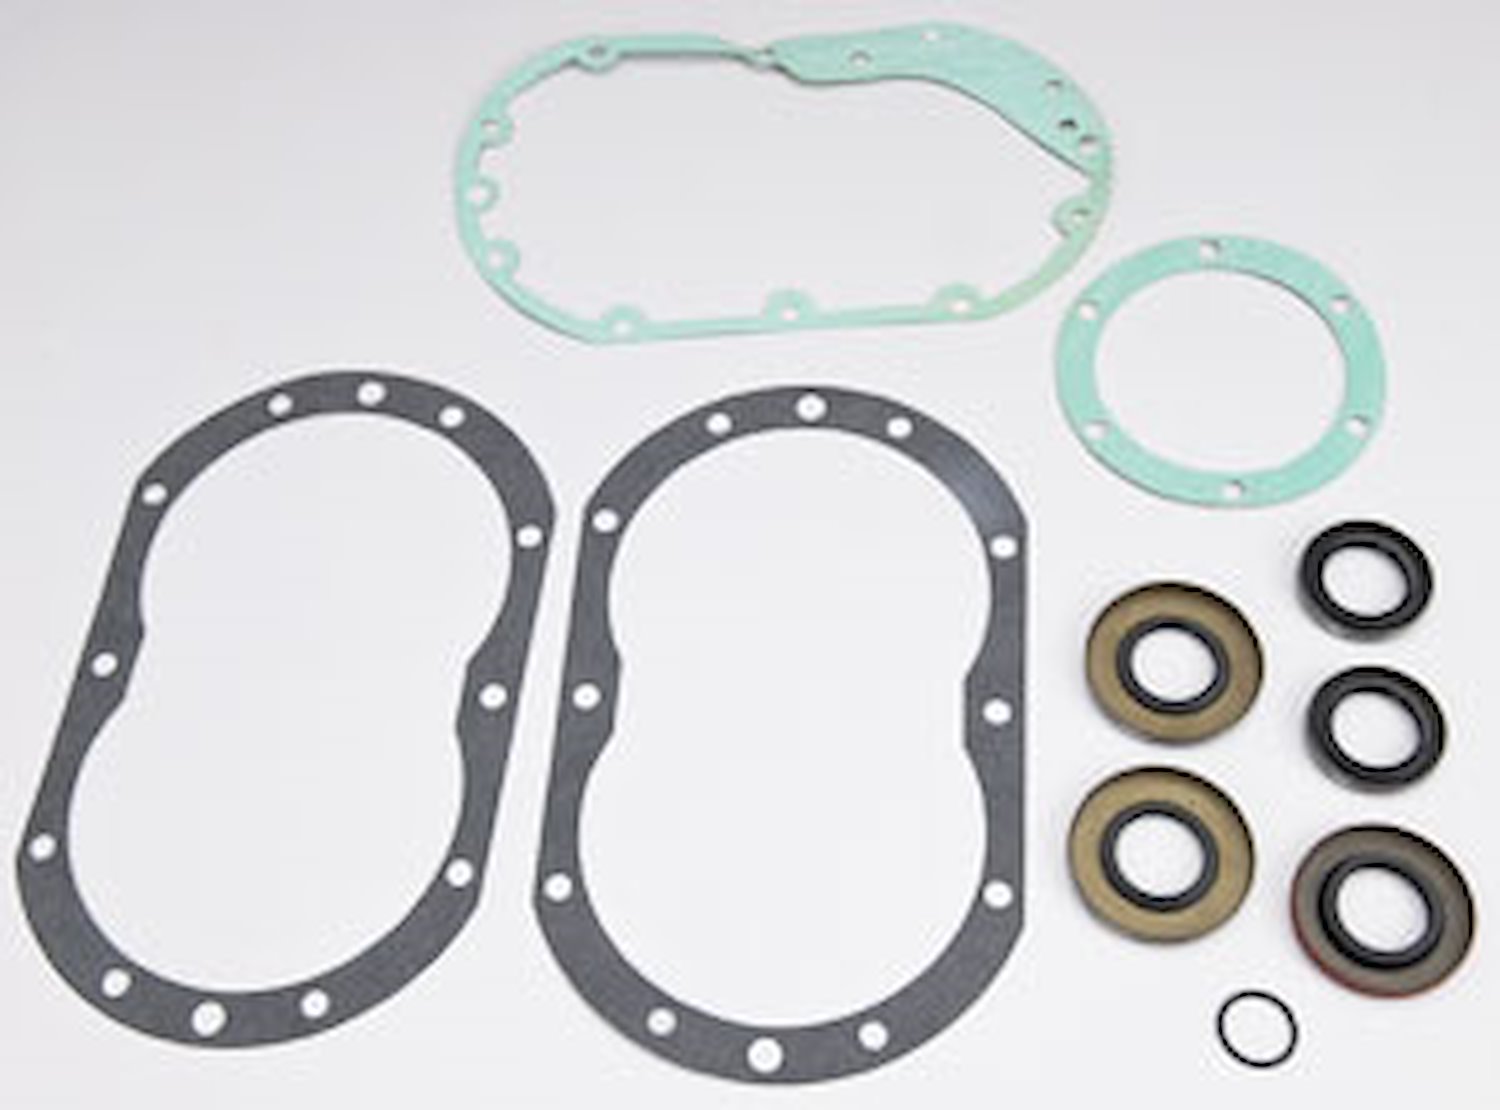 Gasket and Seal Kit For 142 Series Blowers